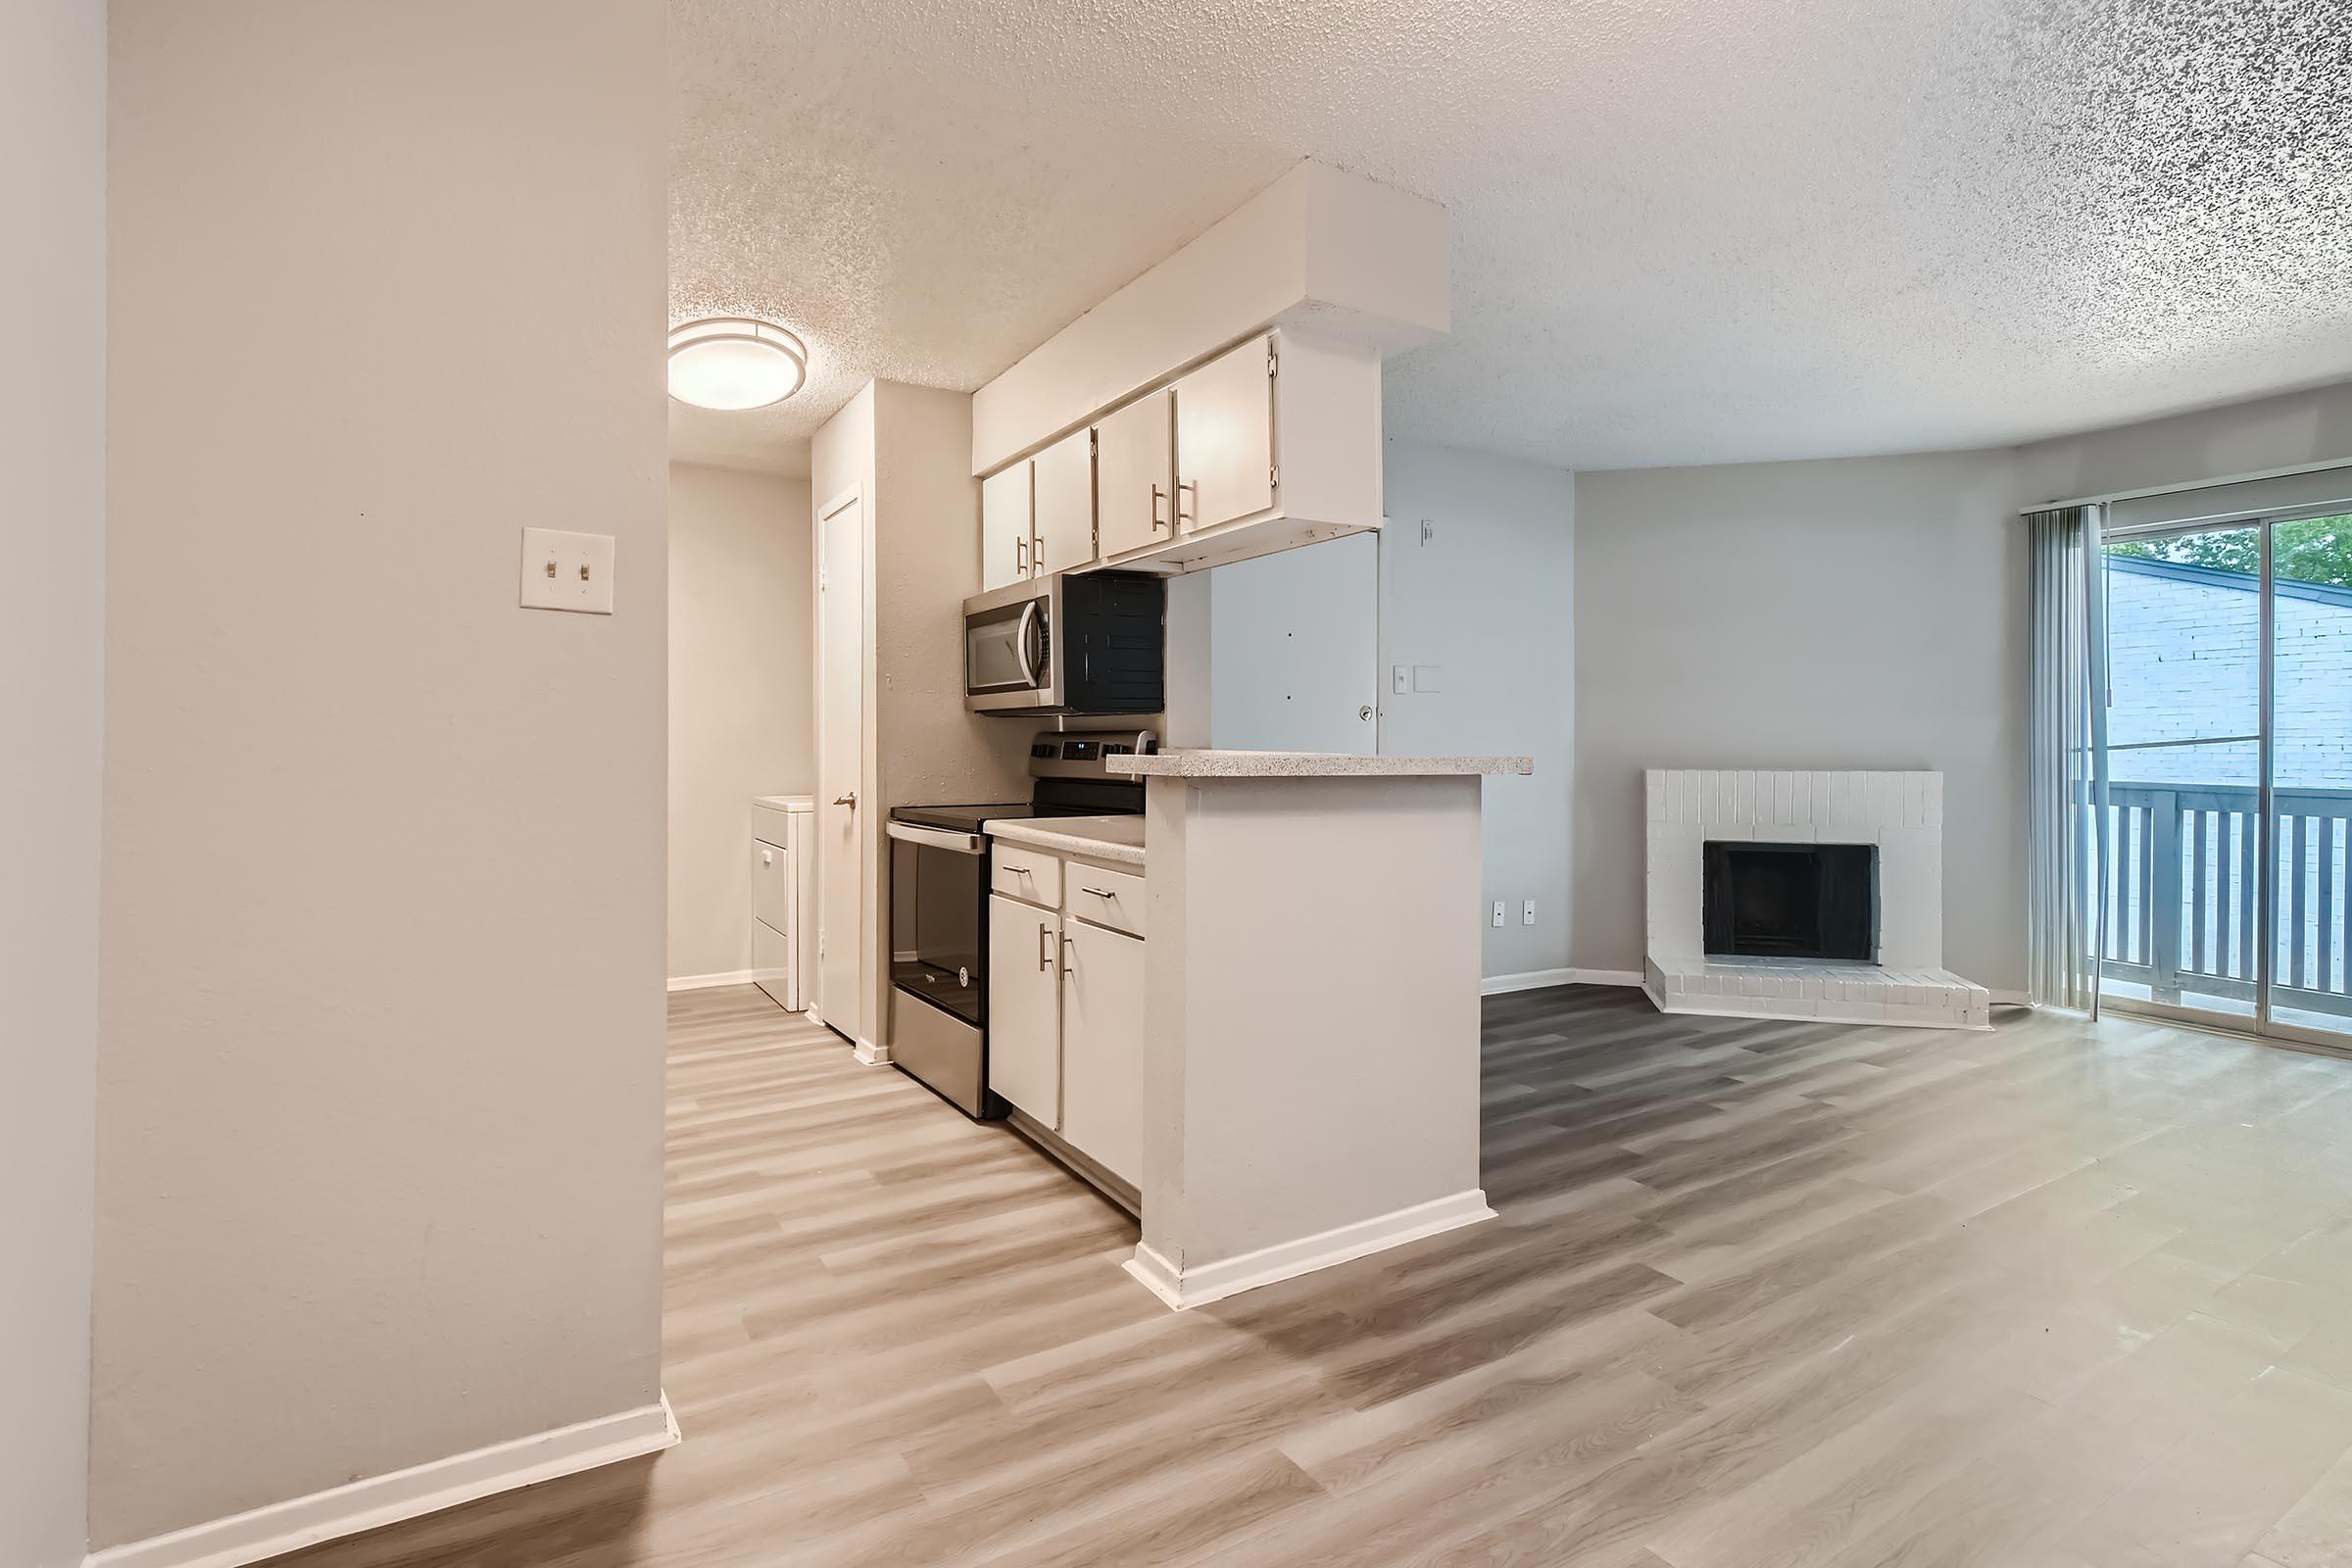 Wood-style flooring throughout the open-concept living area and kitchen in a Rise North Arlington apartment.